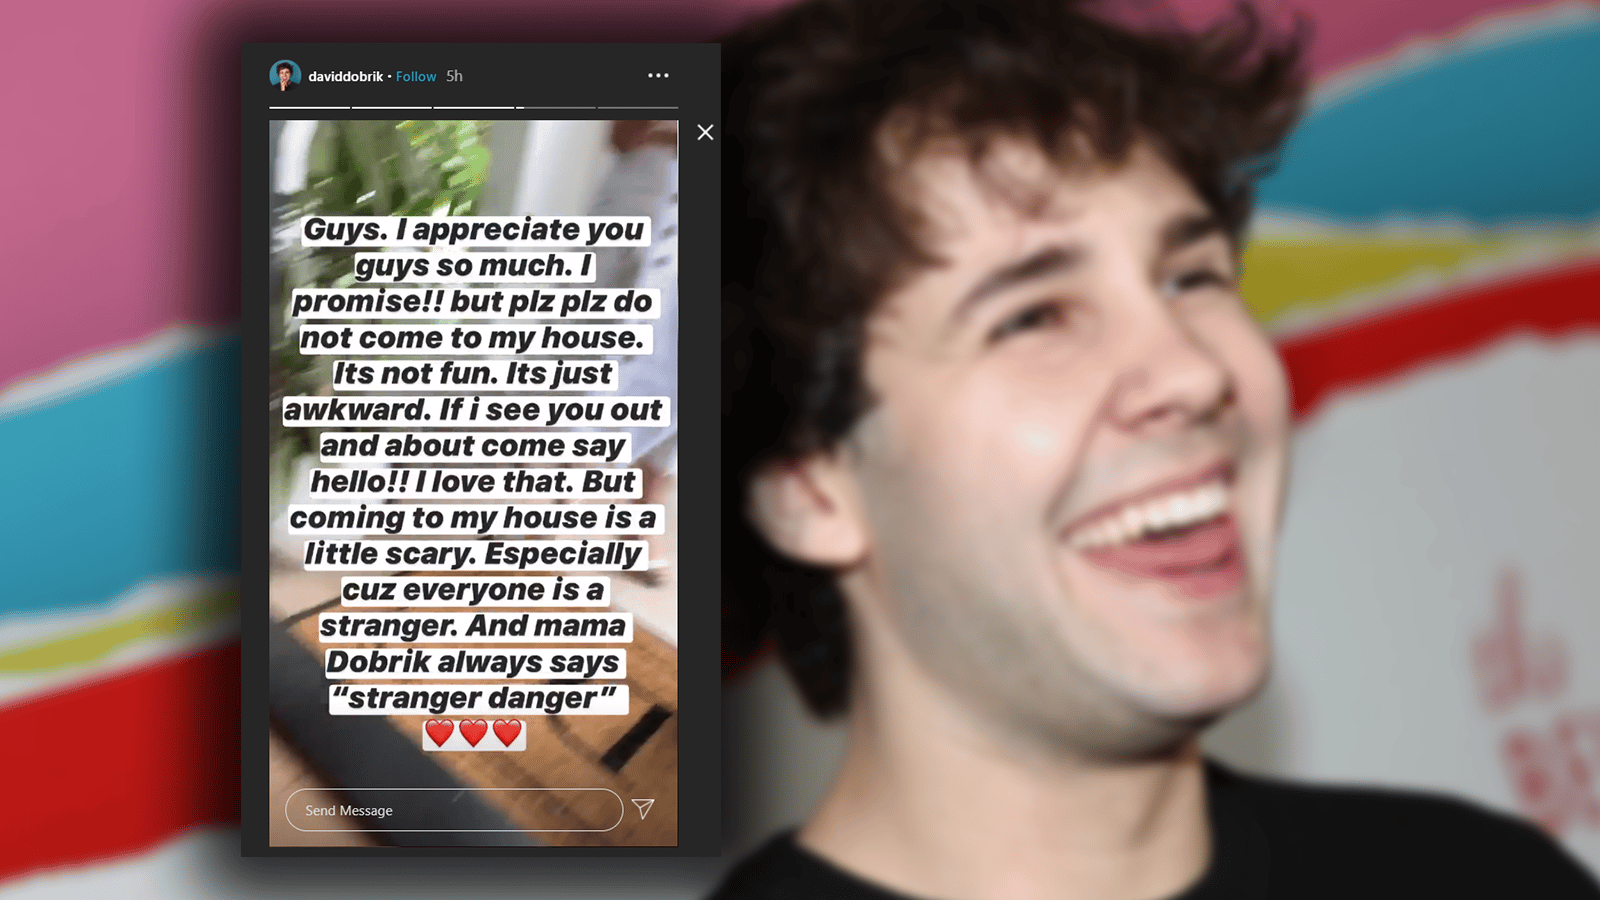 David Dobrik has begged fans not to turn up to his house uninvited during his YouTube hiatus.